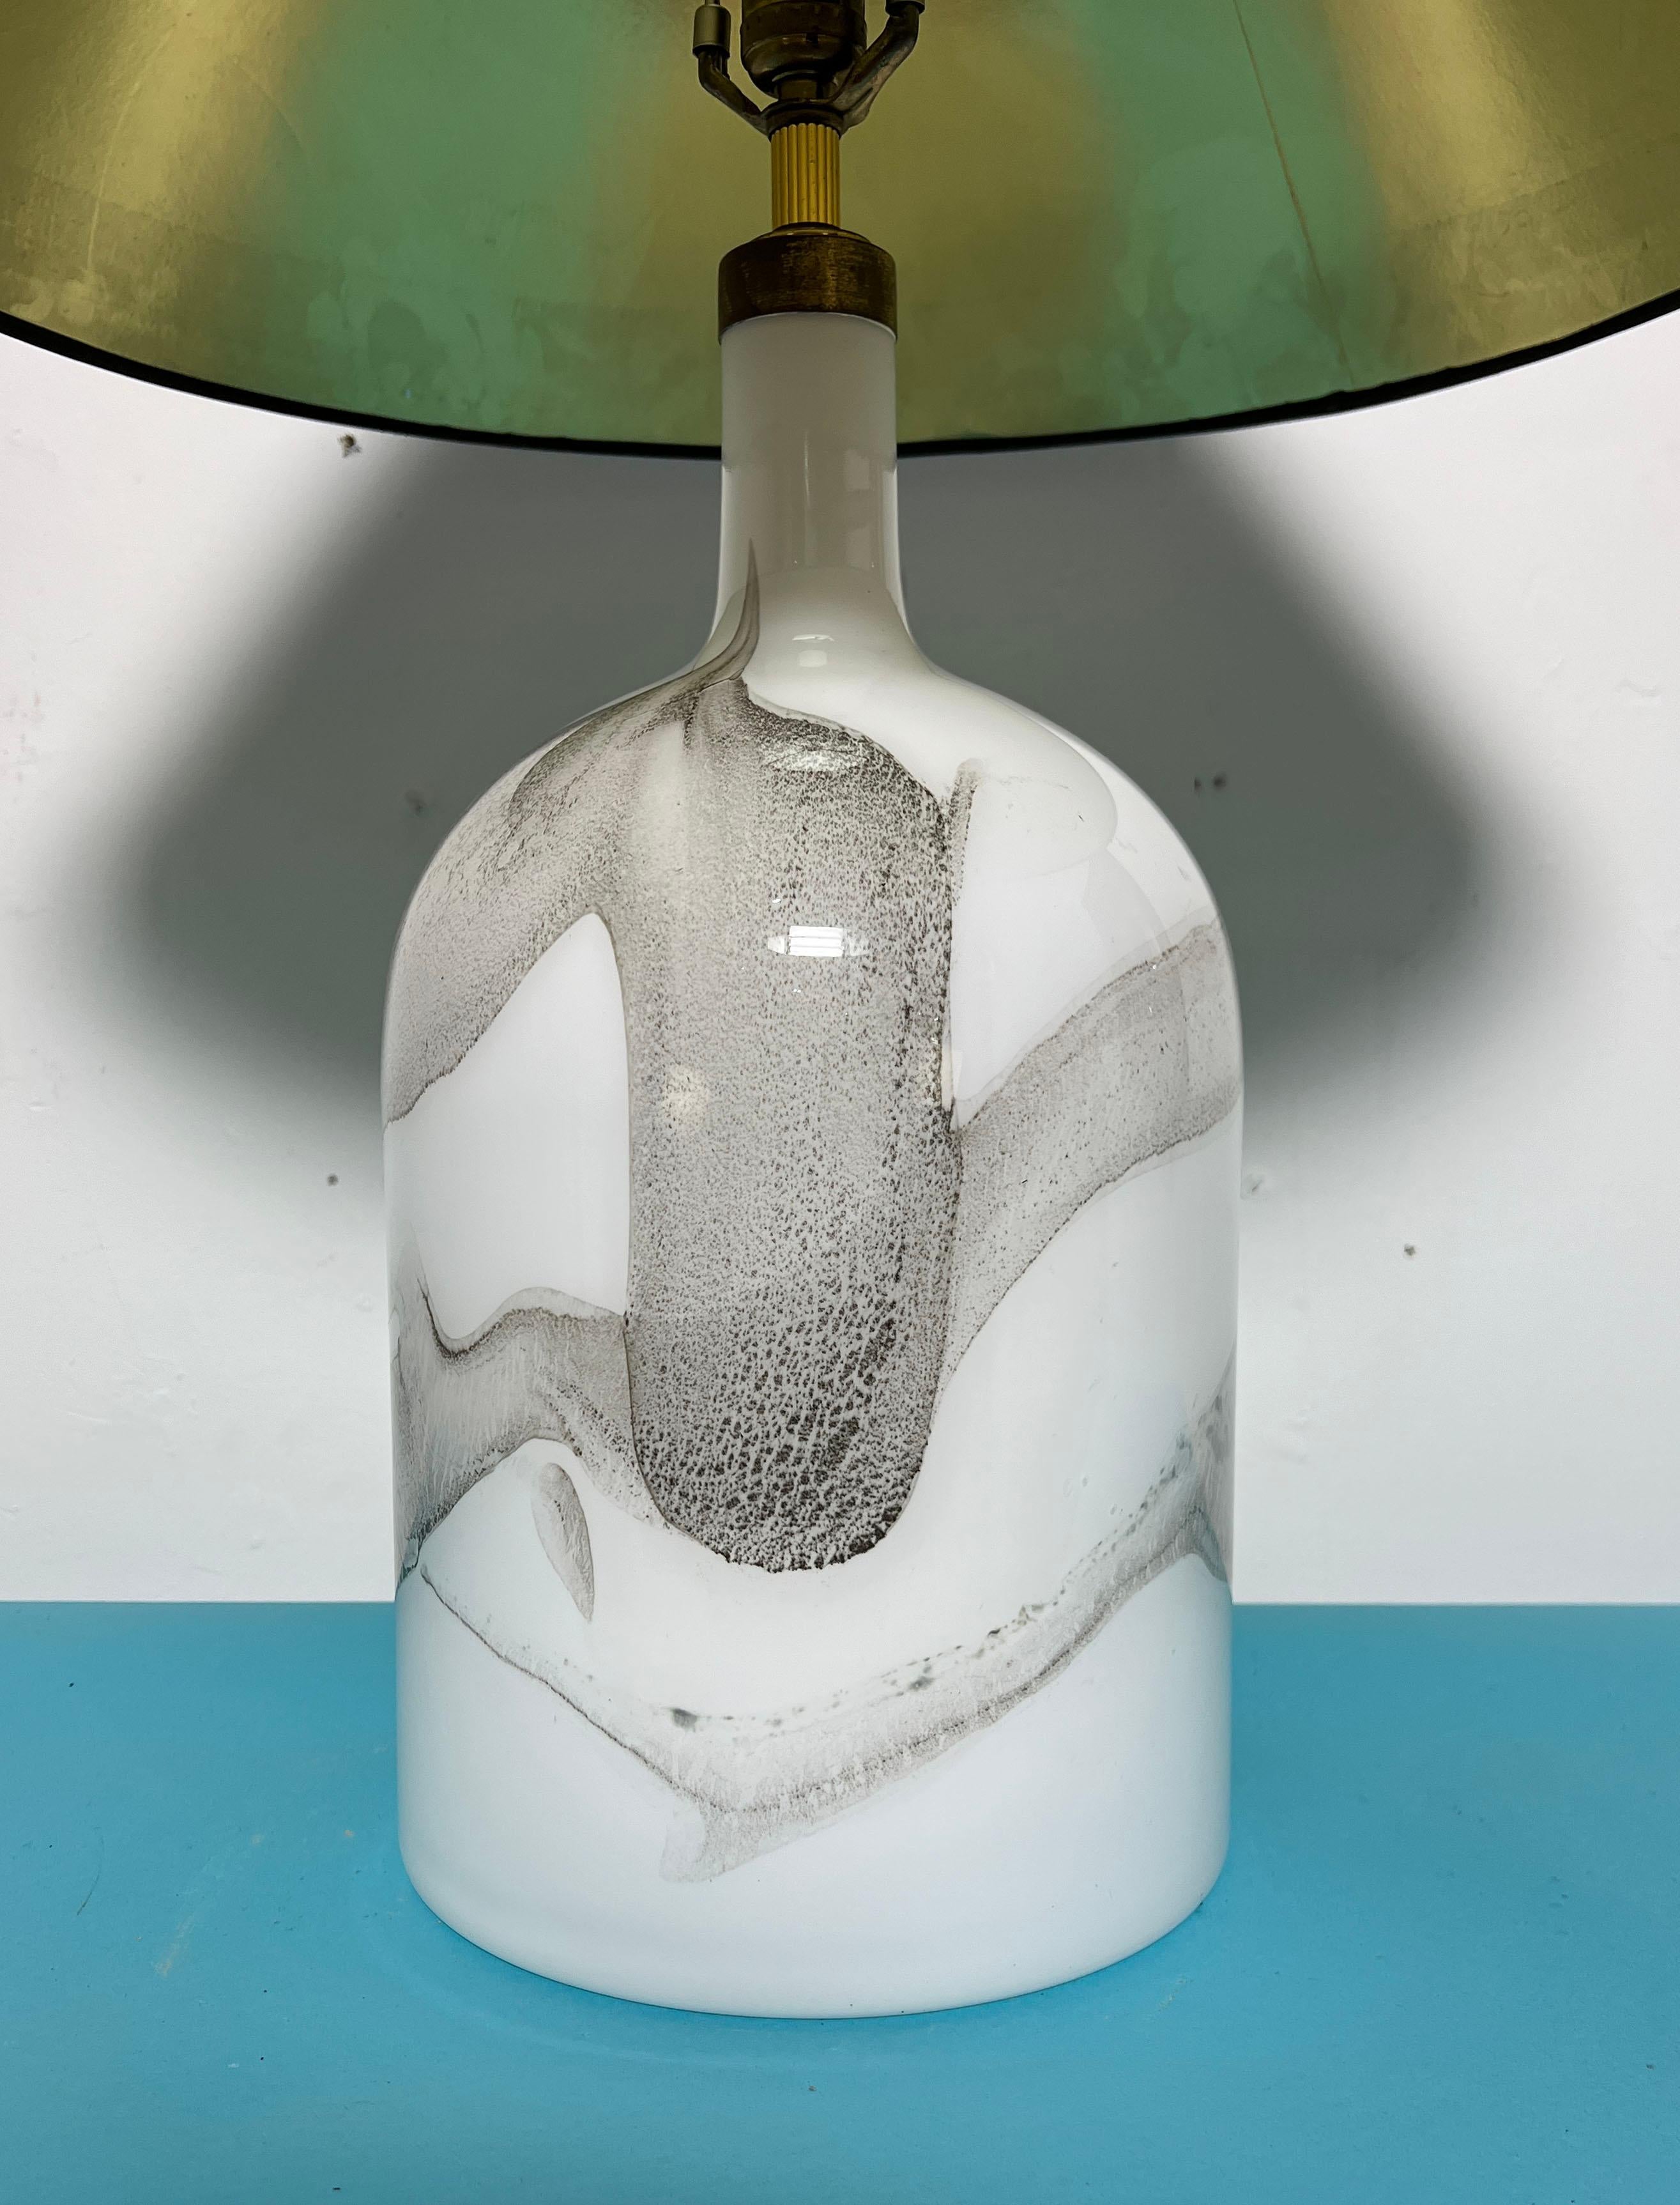 Large cased glass lamp designed by Michael Bang for Holmegaard, Denmark, Circa 1980s, for the Symmetrisk collection.  Lamp shade shown is 24